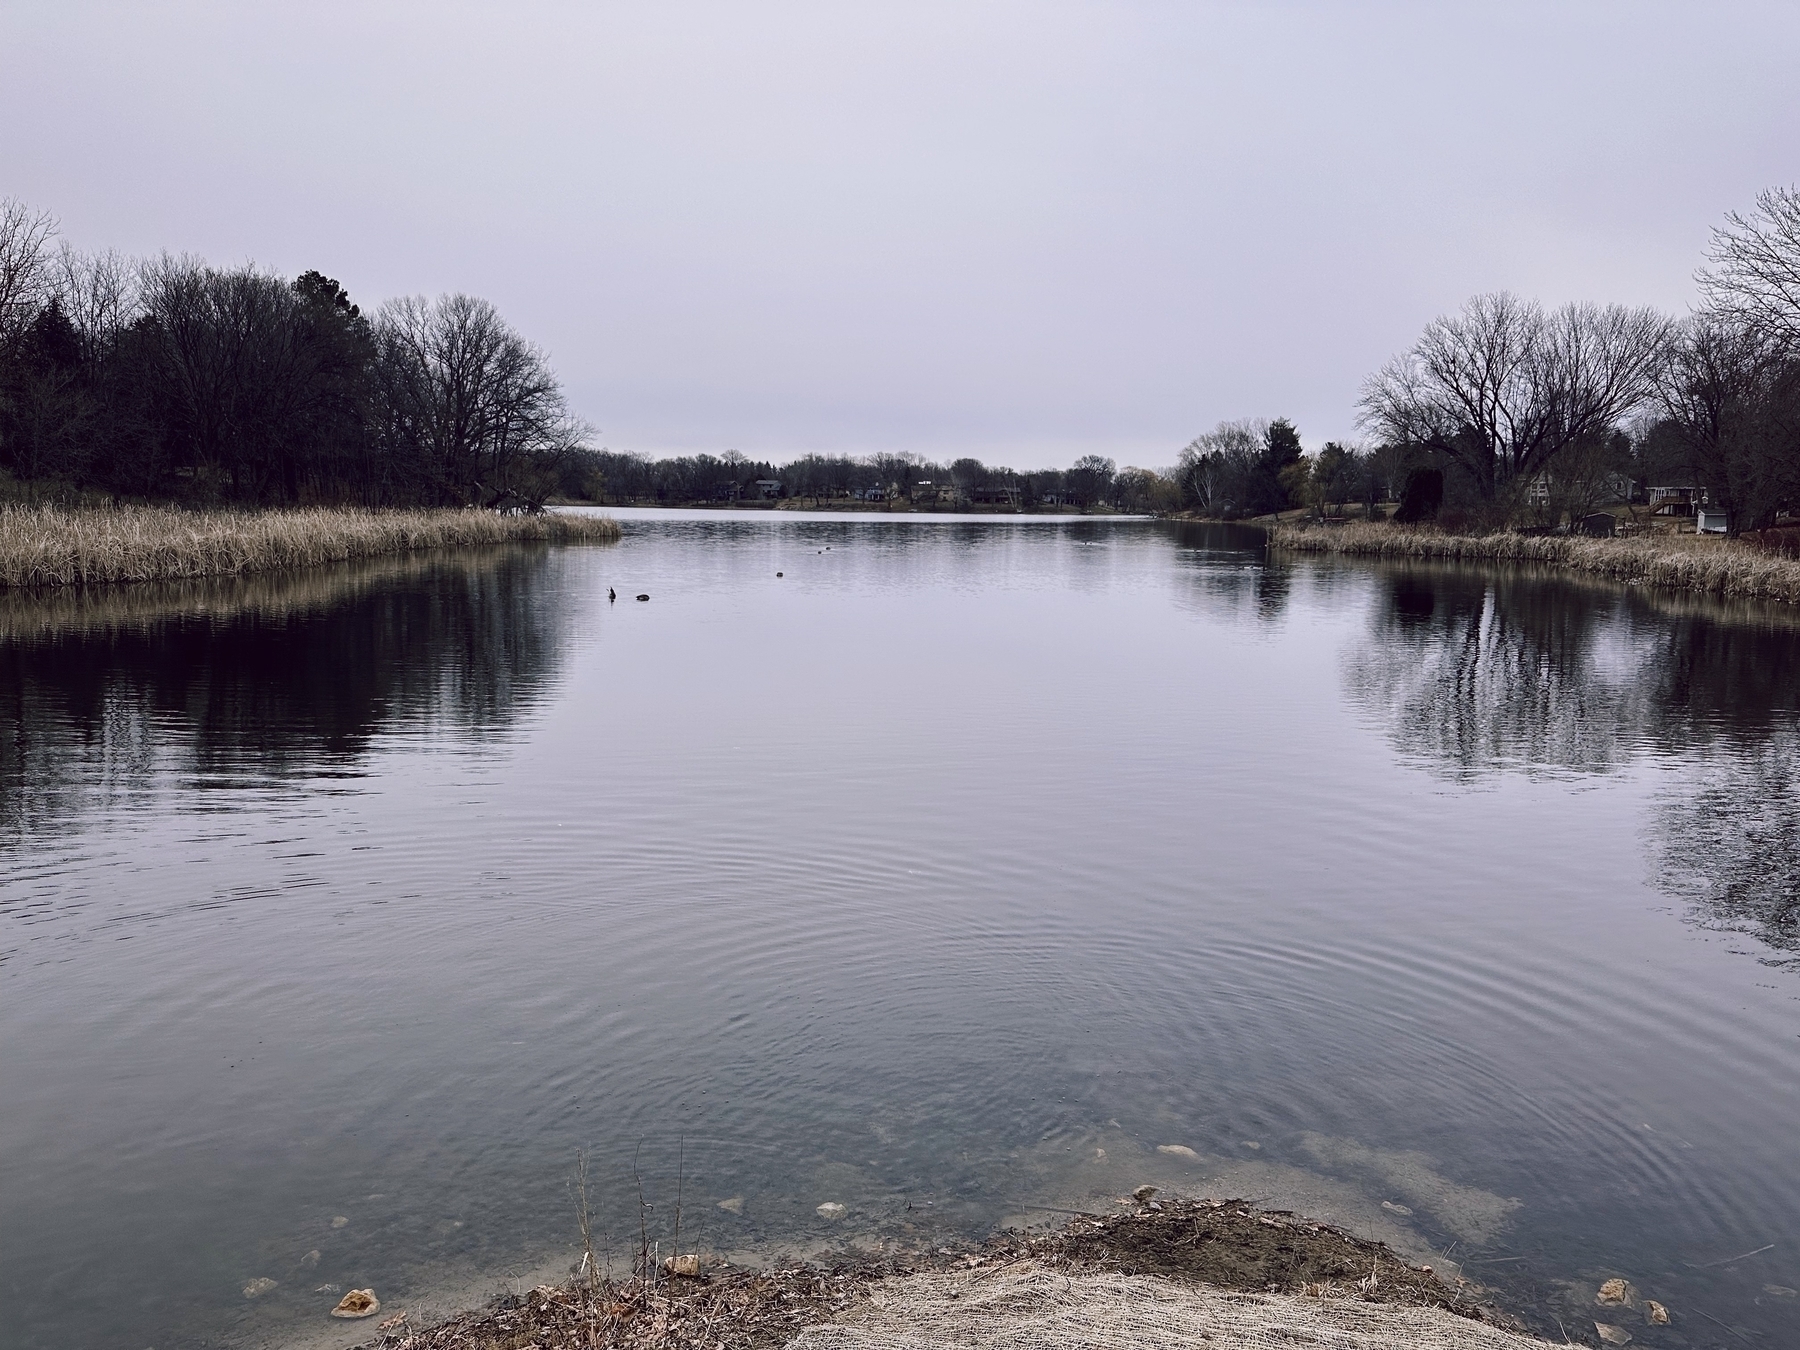 A calm lake reflects trees and overcast skies, with ducks swimming, surrounded by grasses and sparse residential areas.